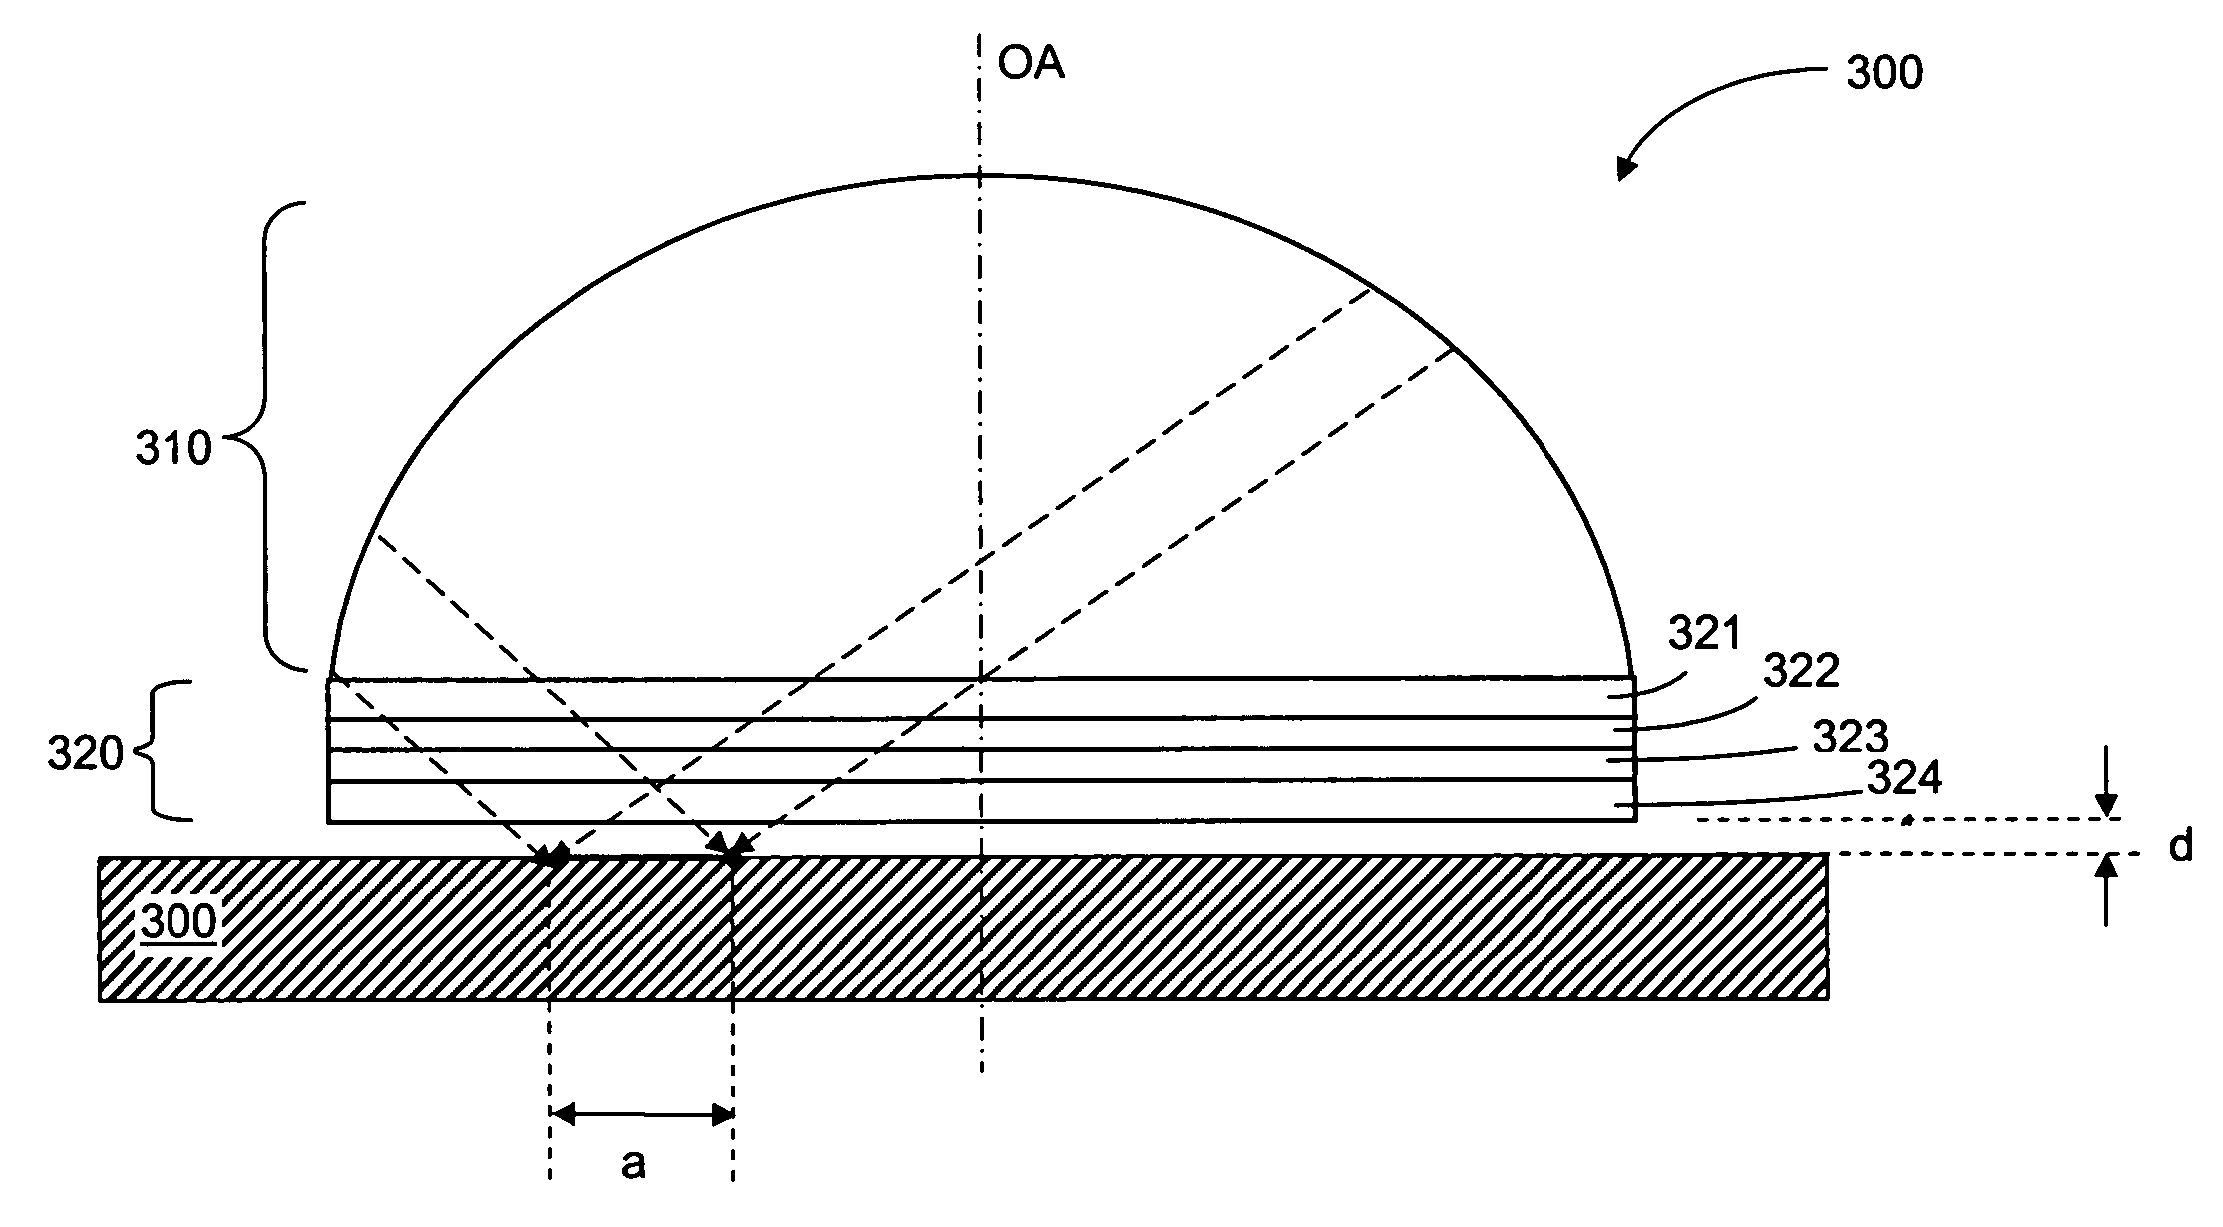 Imaging system, in particular a projection objective of a microlithographic projection exposure apparatus